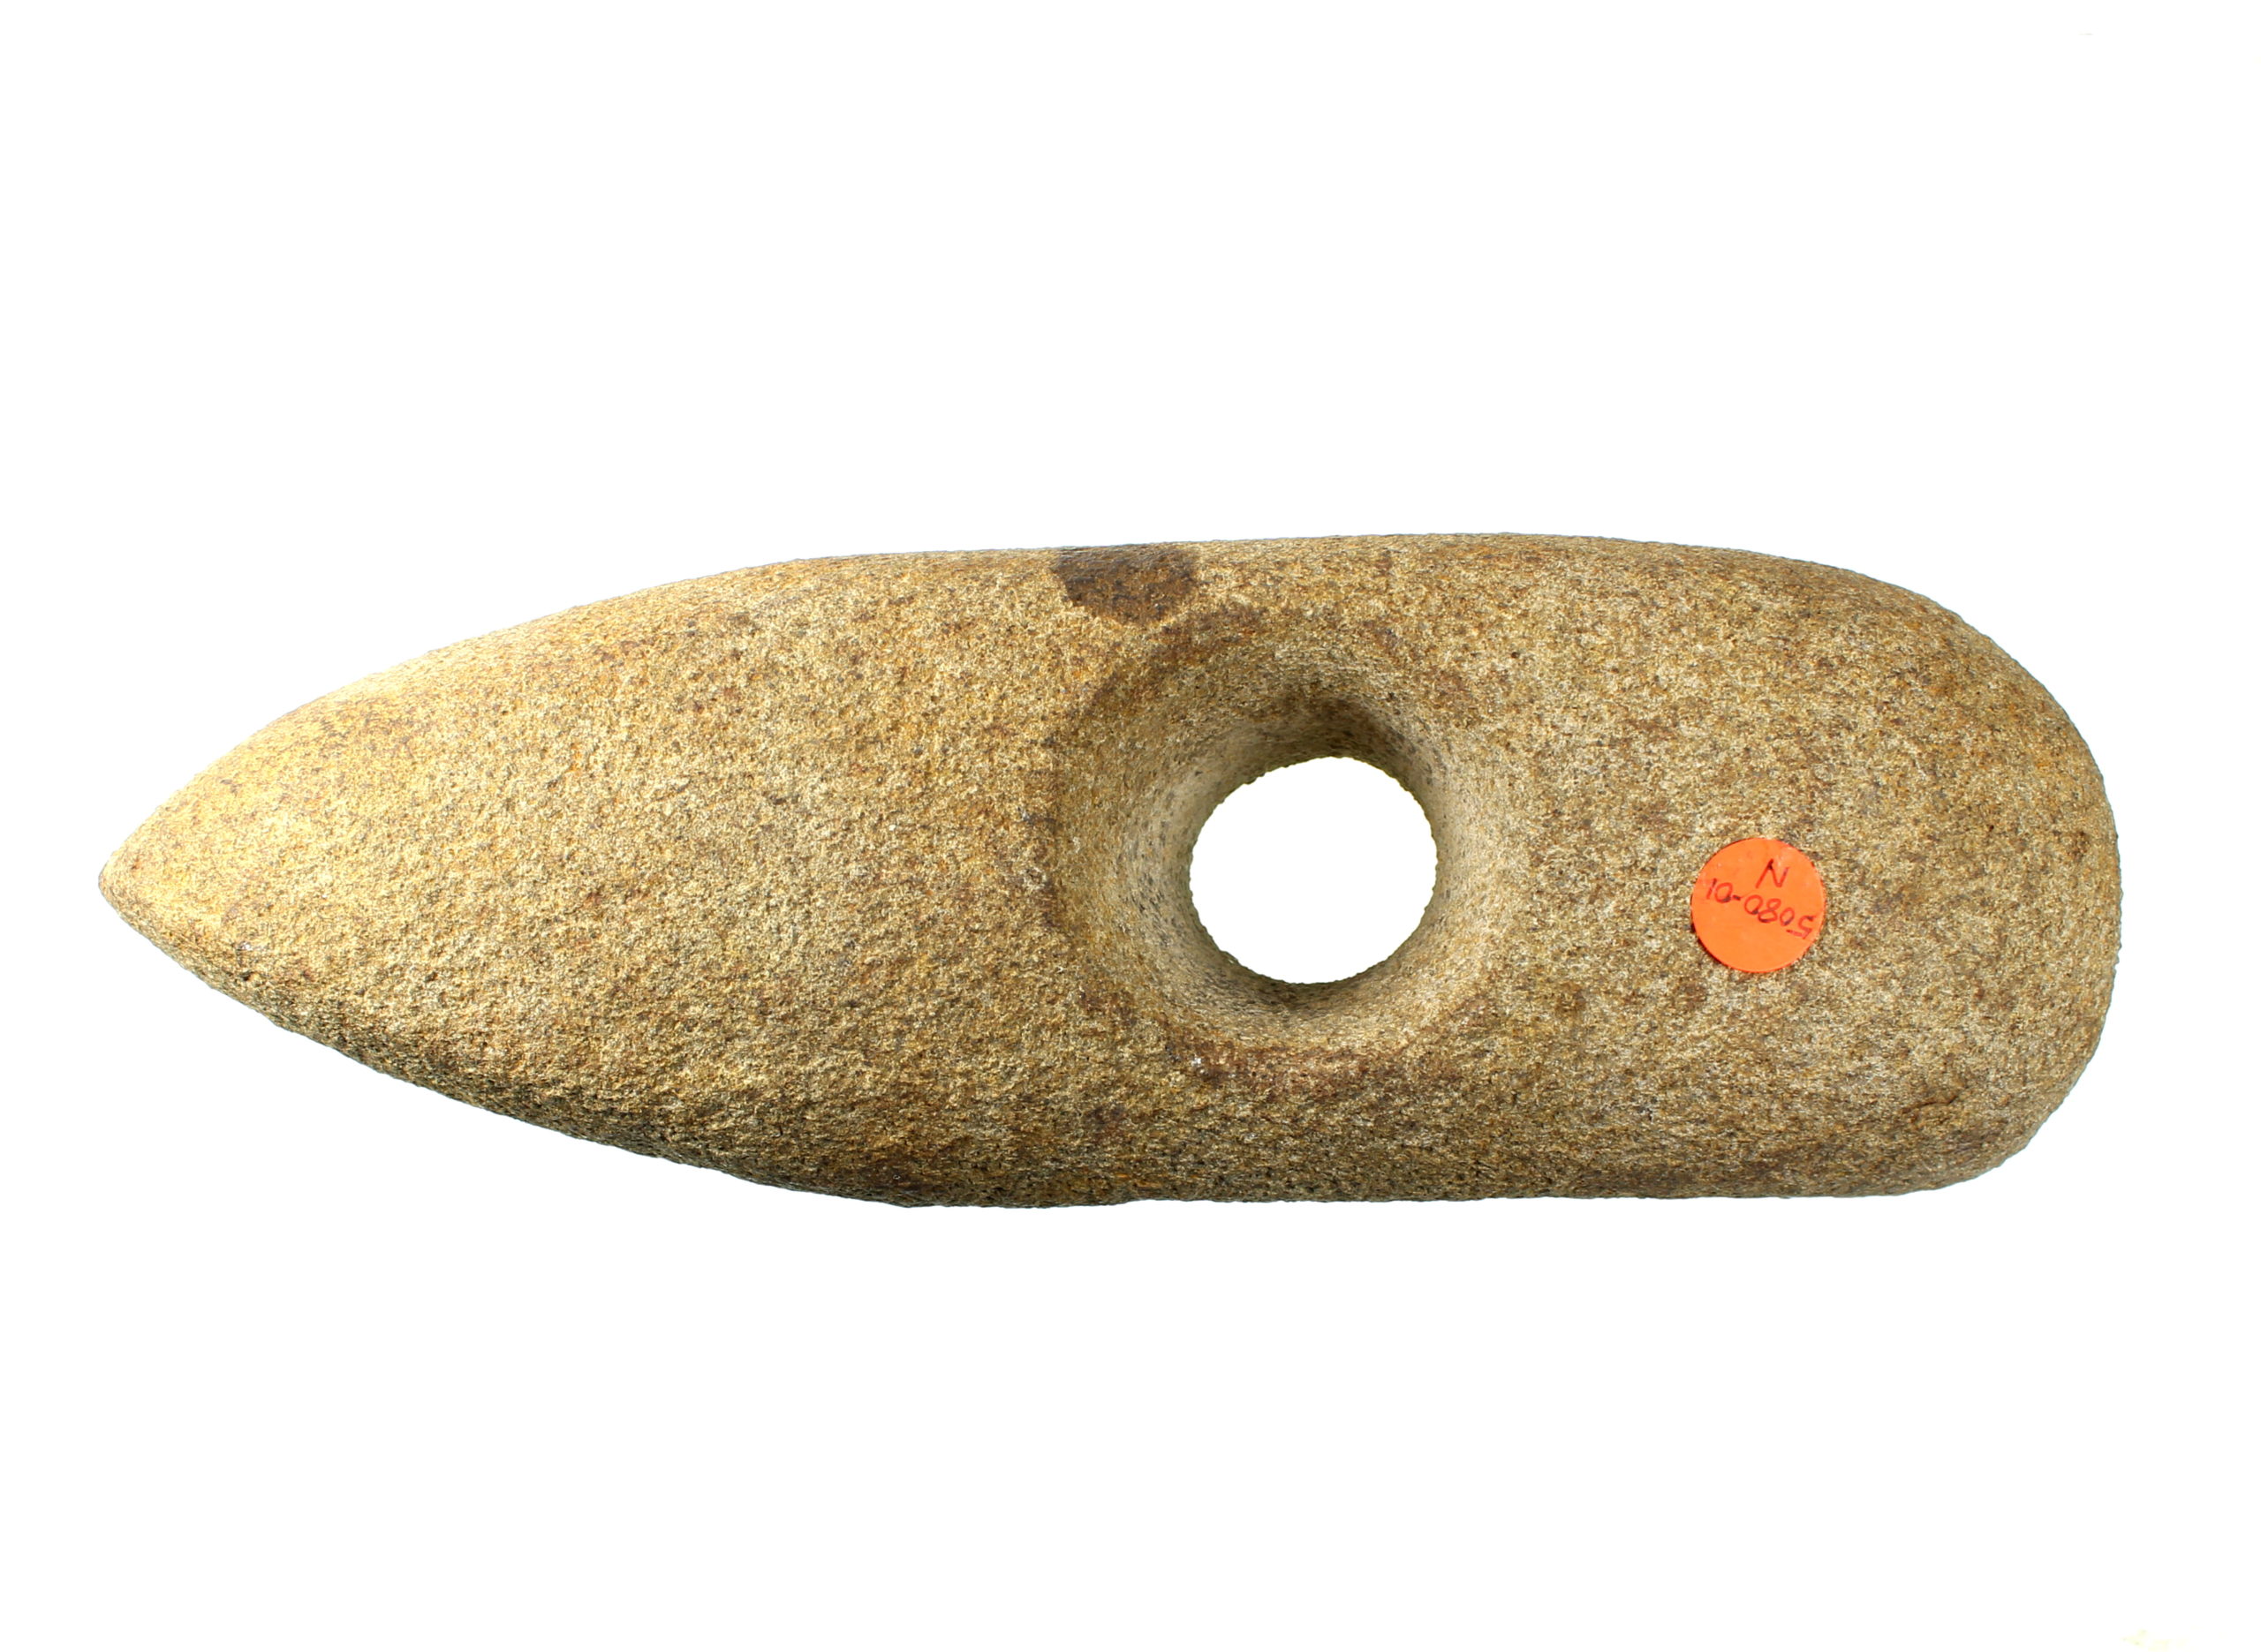 Neolithic 2500-1500BC Stone Axe Hammer - The Simon Camm Collection ...